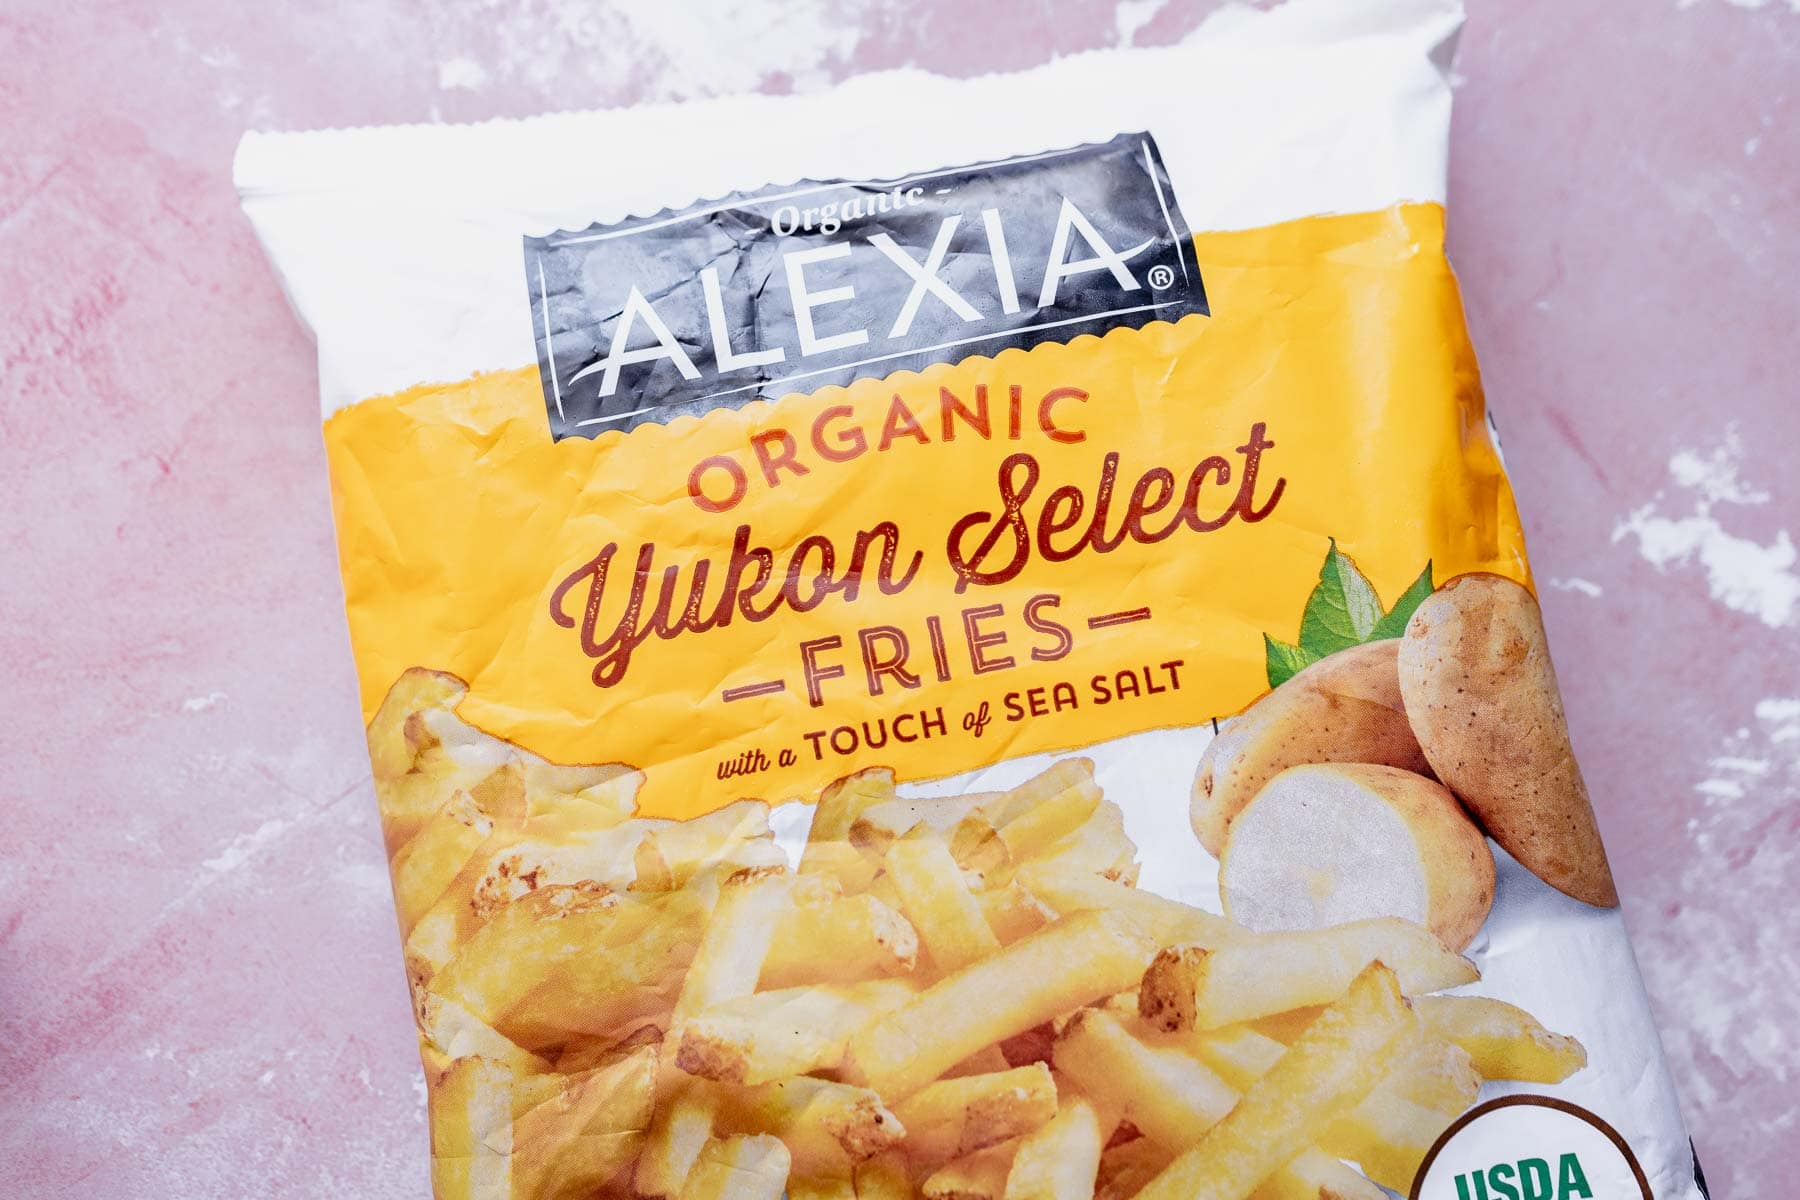 Bag of alexia organic yukon select air fryer frozen french fries on a pink surface.